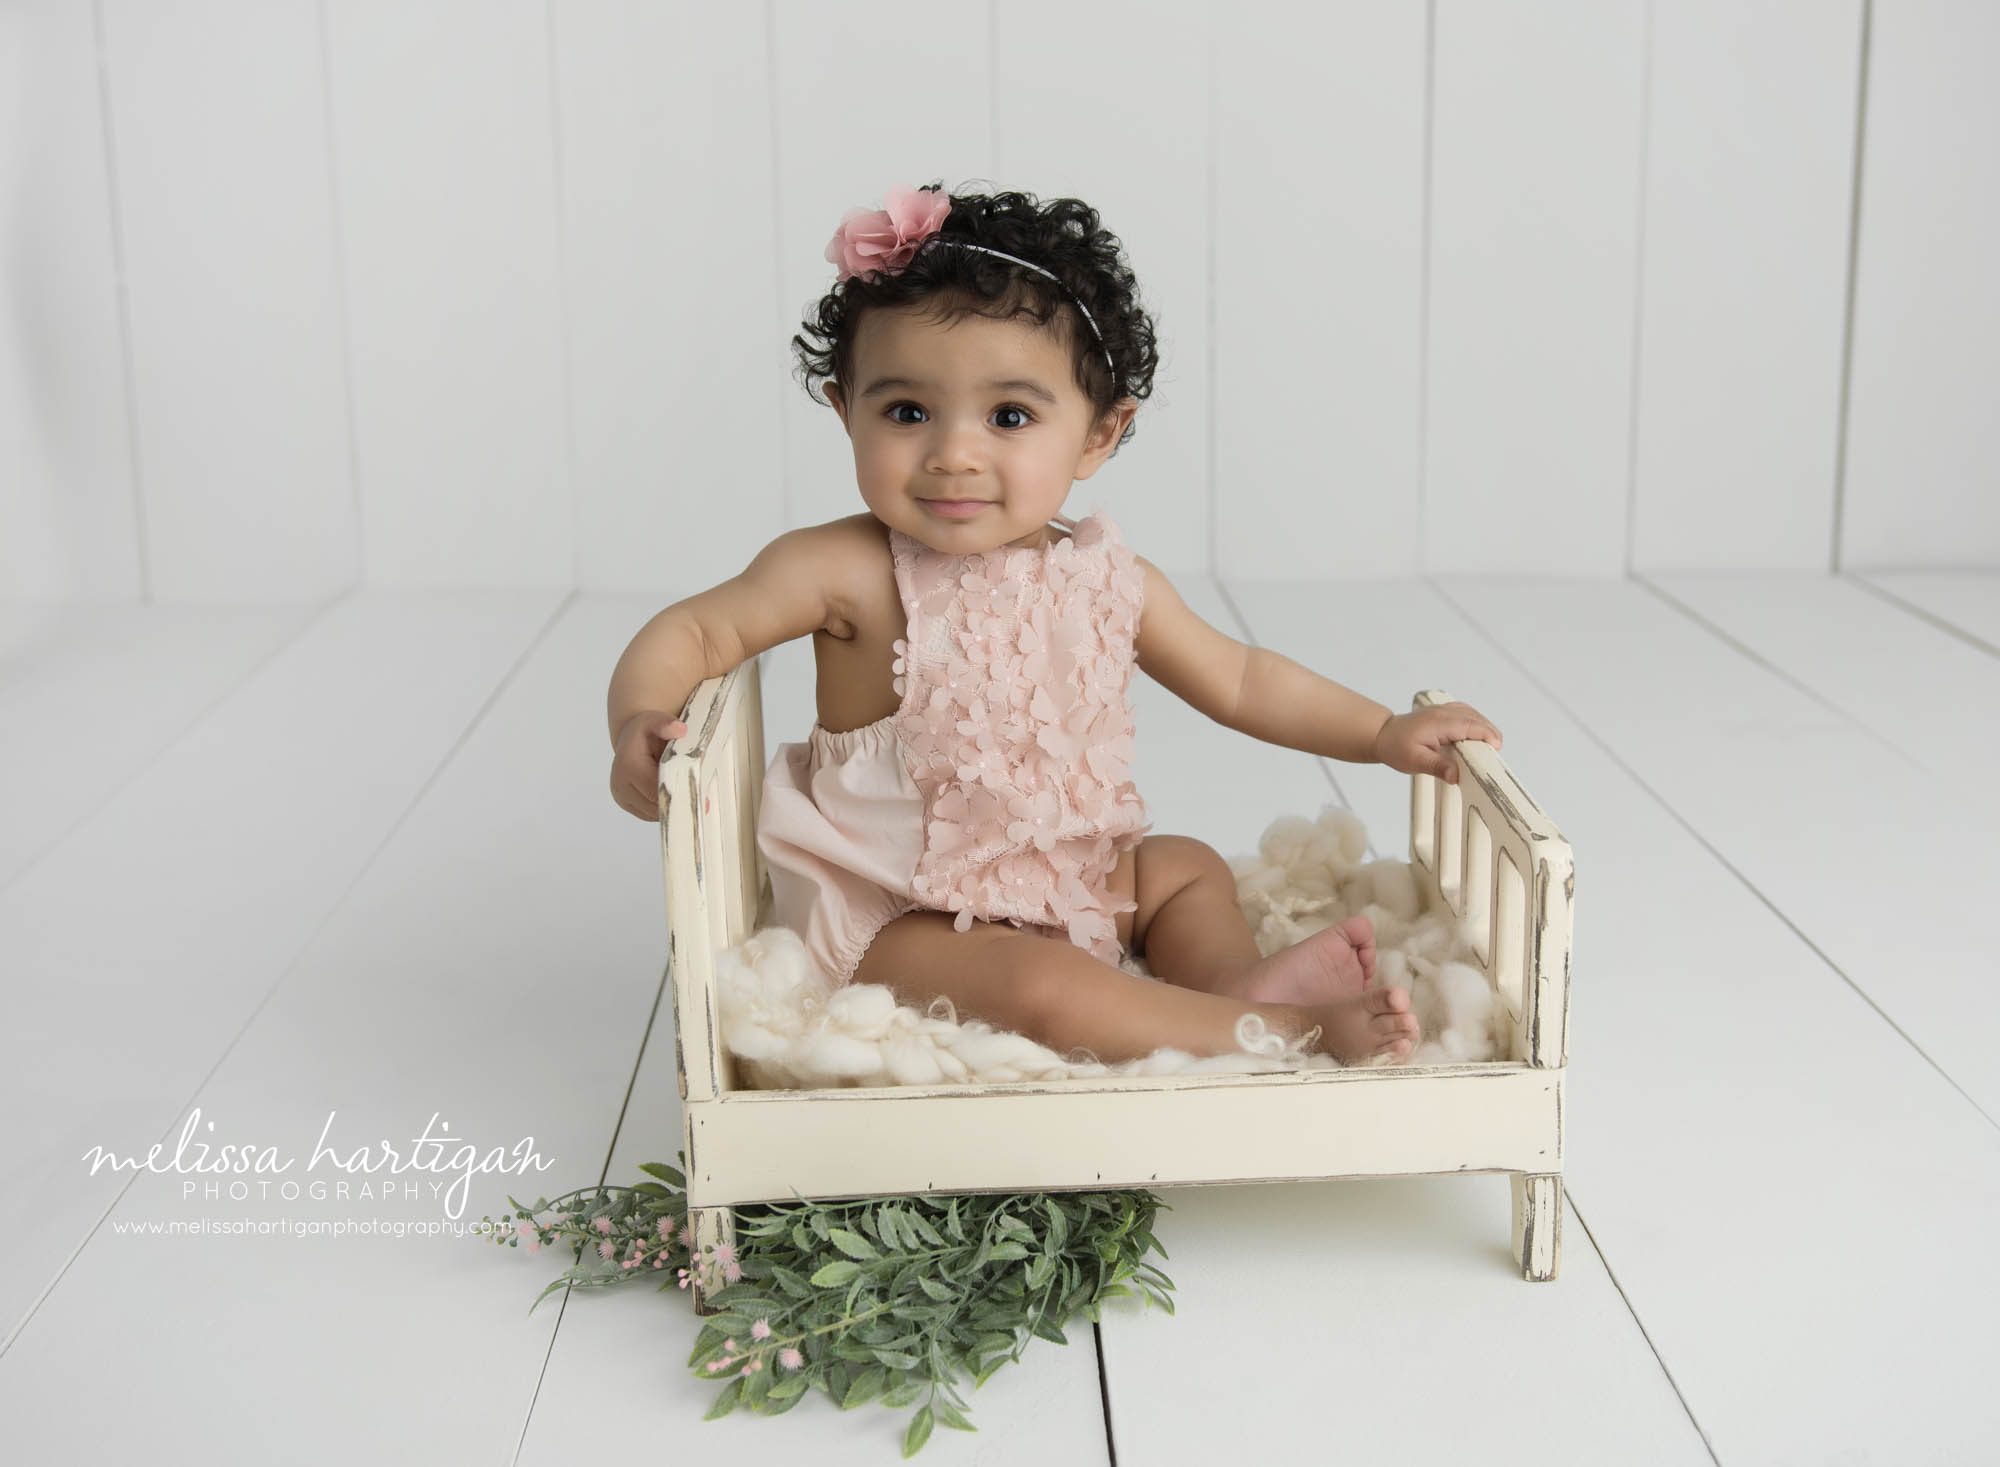 baby girl sitting on wooden bed prop in studio photography session capturing sitting up baby milestone